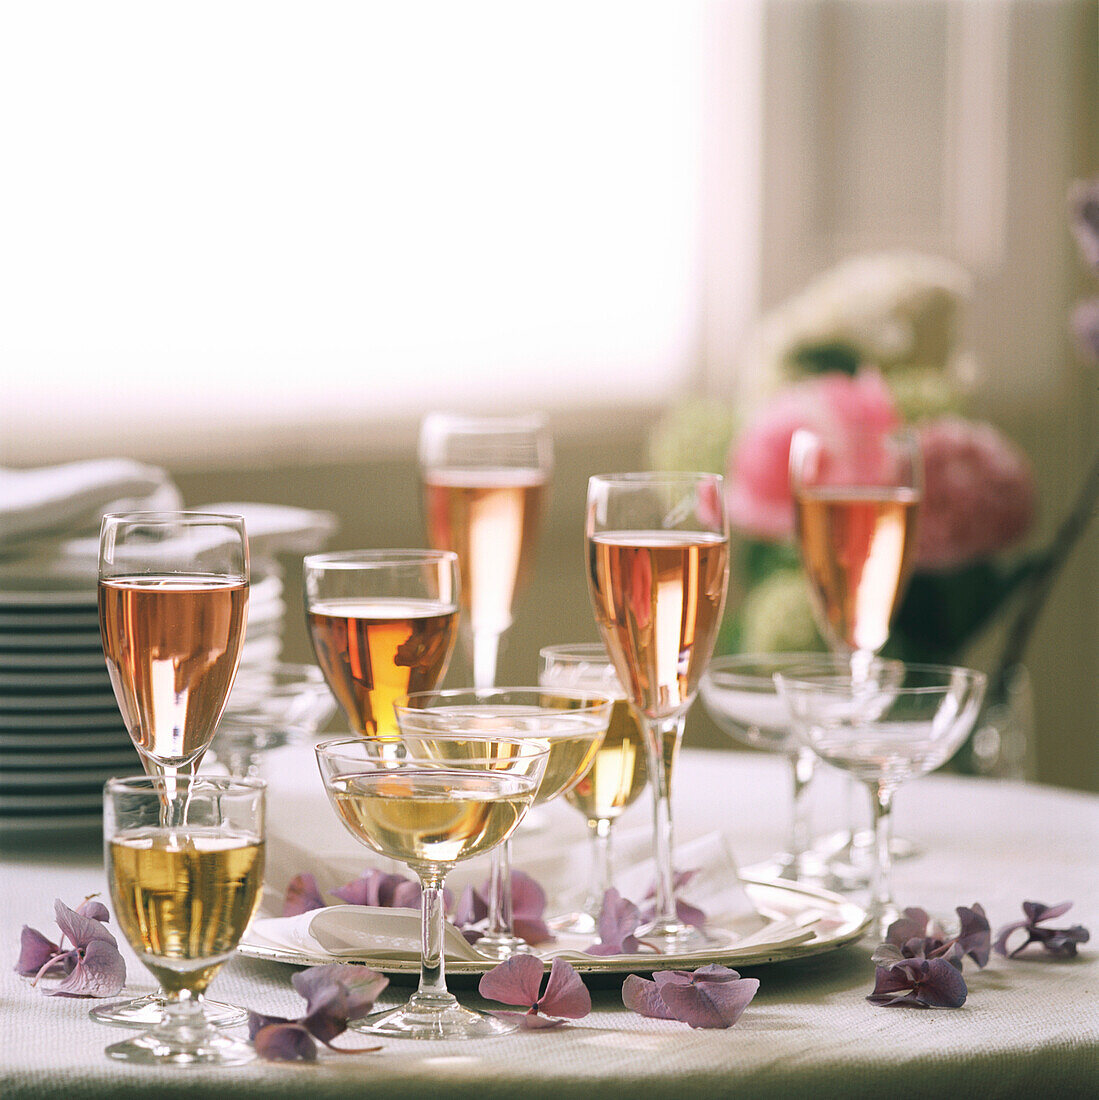 Table top with filled wine glasses plates and petal decoration